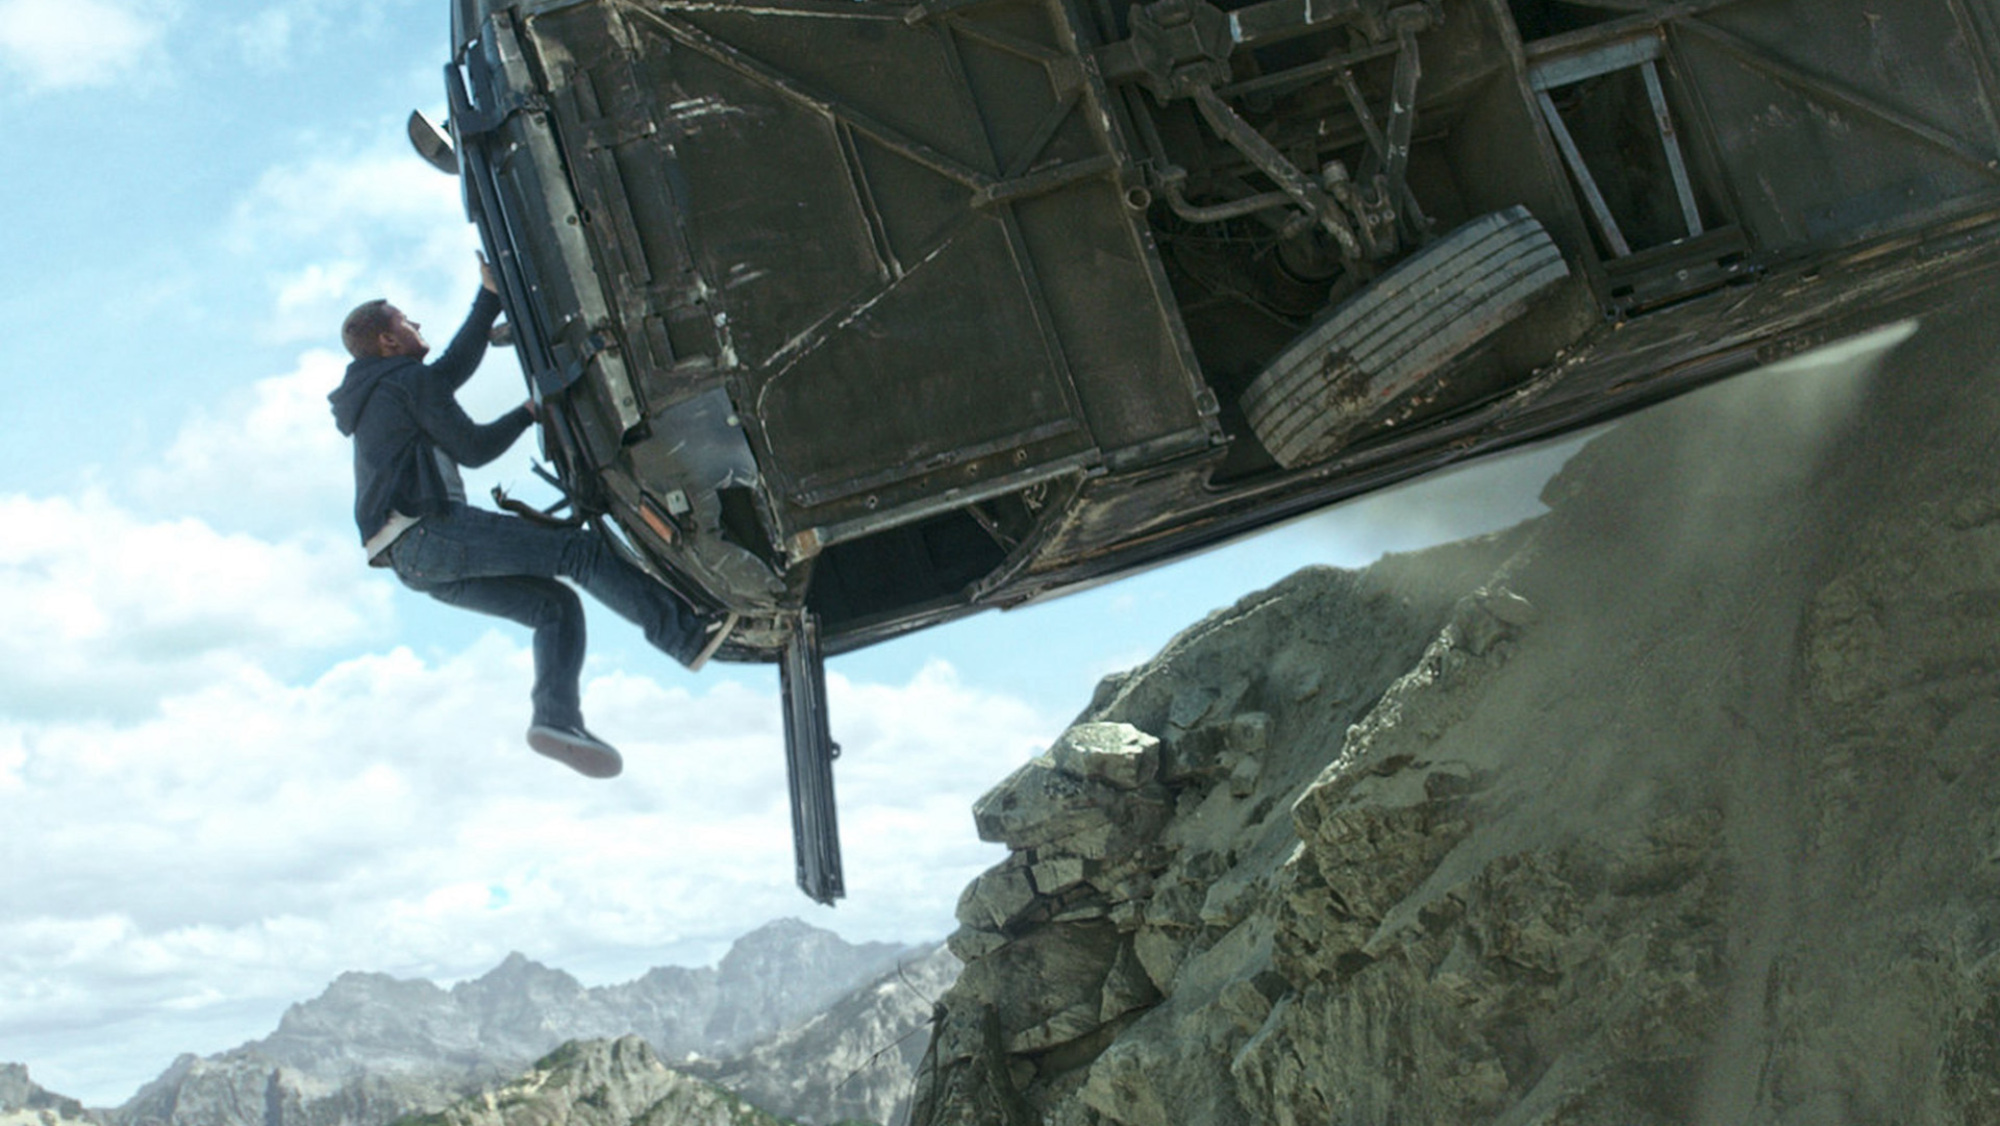 Paul Walker climbs up a bus teetering on the edge of a cliff in "Furious 7."